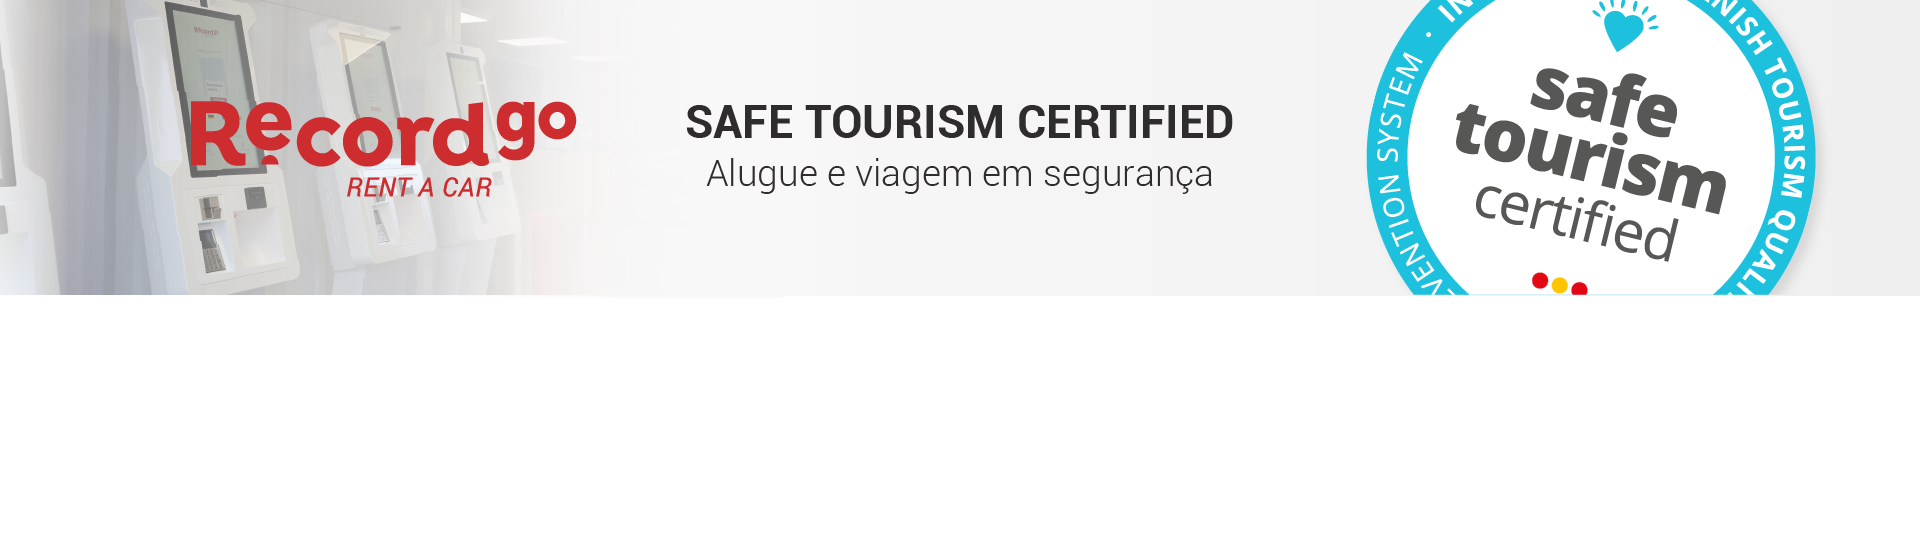 Selo “Safe Tourism Certified"